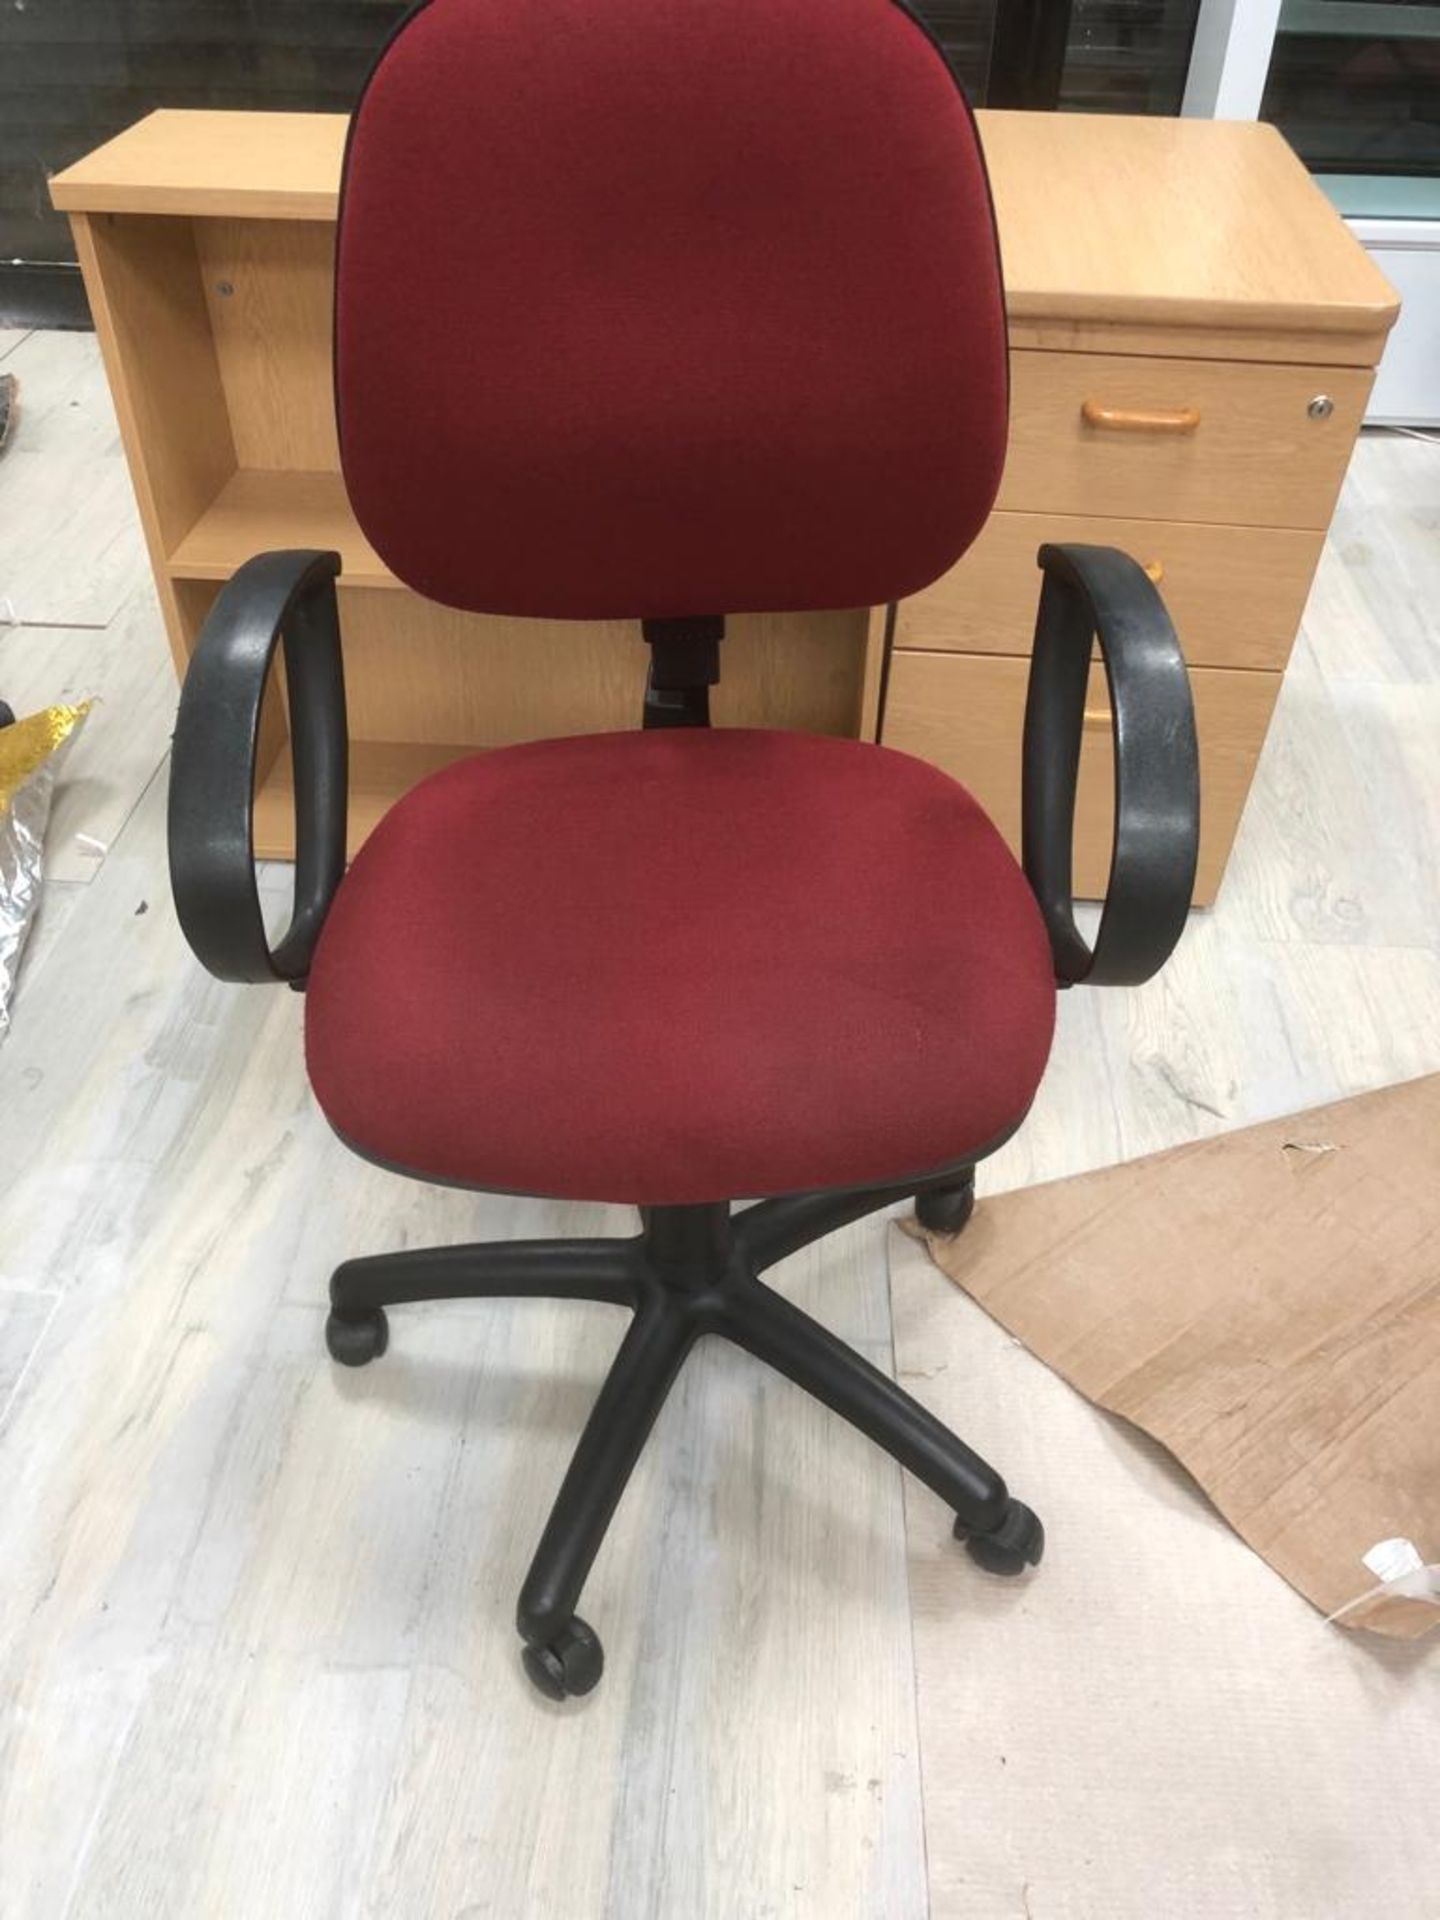 9 Burgundy Fabric Adjustable Office Chairs On - Image 4 of 4